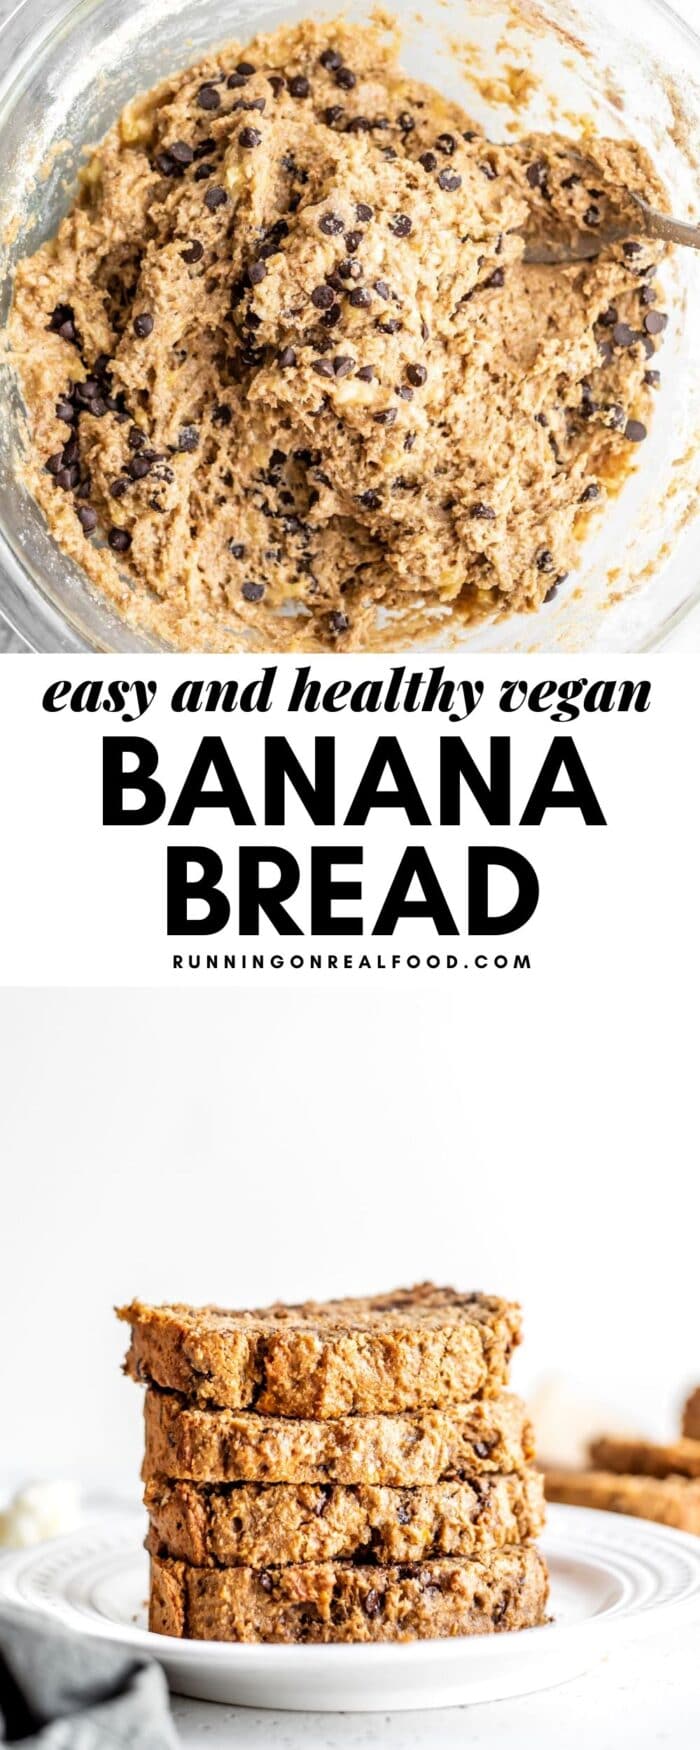 Pinterest graphic collage with 2 images of banana bread and a text overlay.